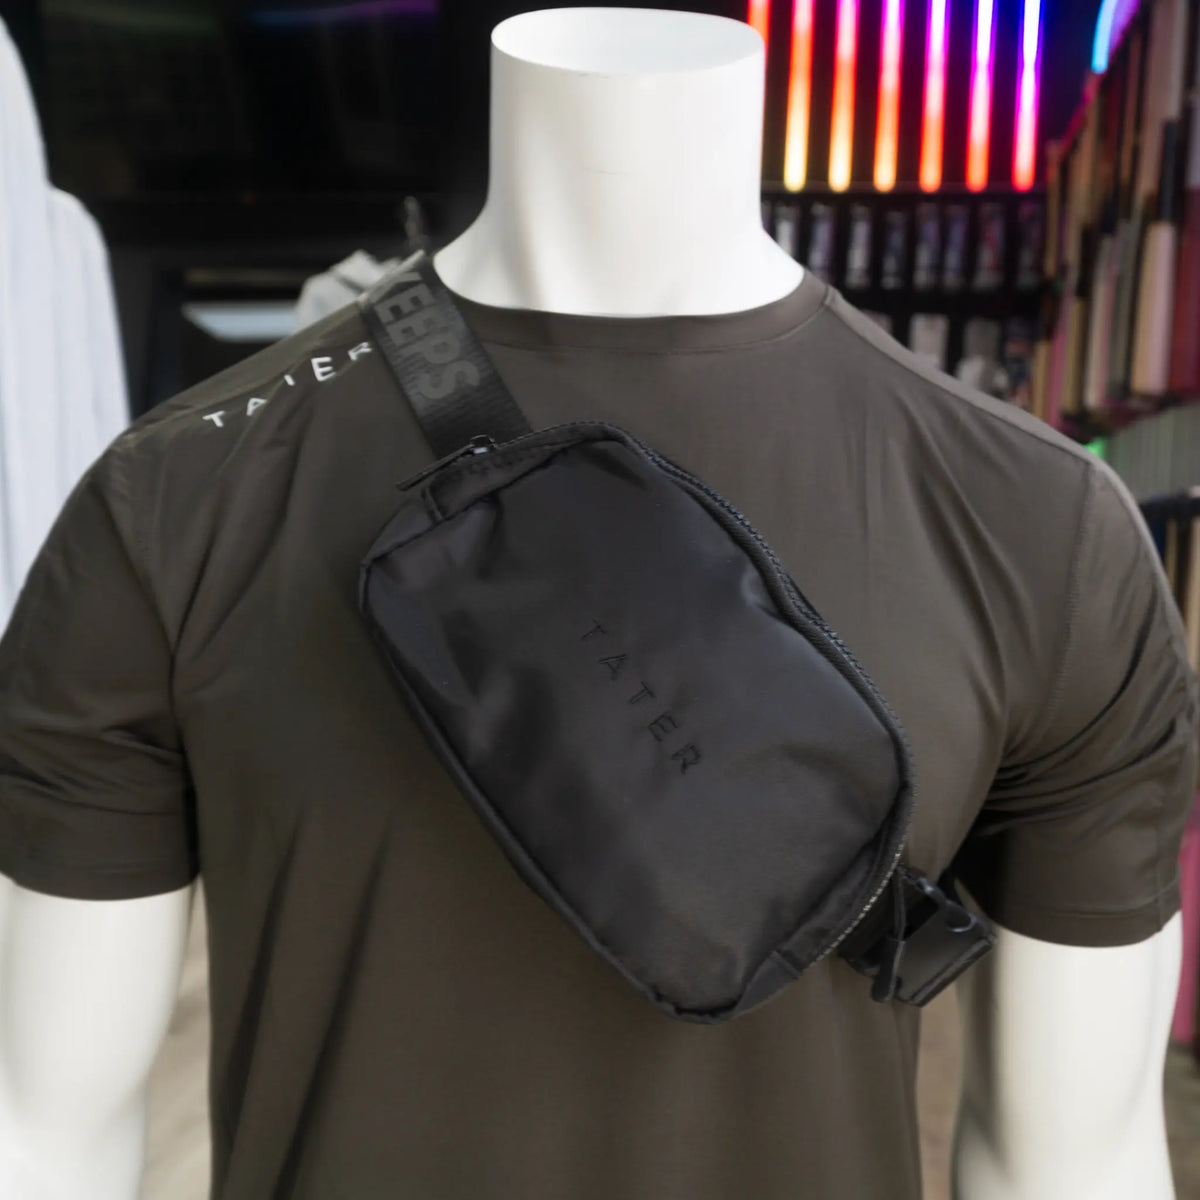 The image presents a mannequin dressed in an olive athletic T-shirt with a black crossbody fanny pack slung over the shoulder. The fanny pack features the Tater brand name embossed on the front, while the strap is adorned with the phrase &quot;KEEPERS&quot; in a repeating pattern, contributing to the sporty and stylish aesthetic of the product. The combination of the crossbody pack with the athletic wear suggests a trendy and practical accessory for sports enthusiasts or individuals with an active lifestyle. 